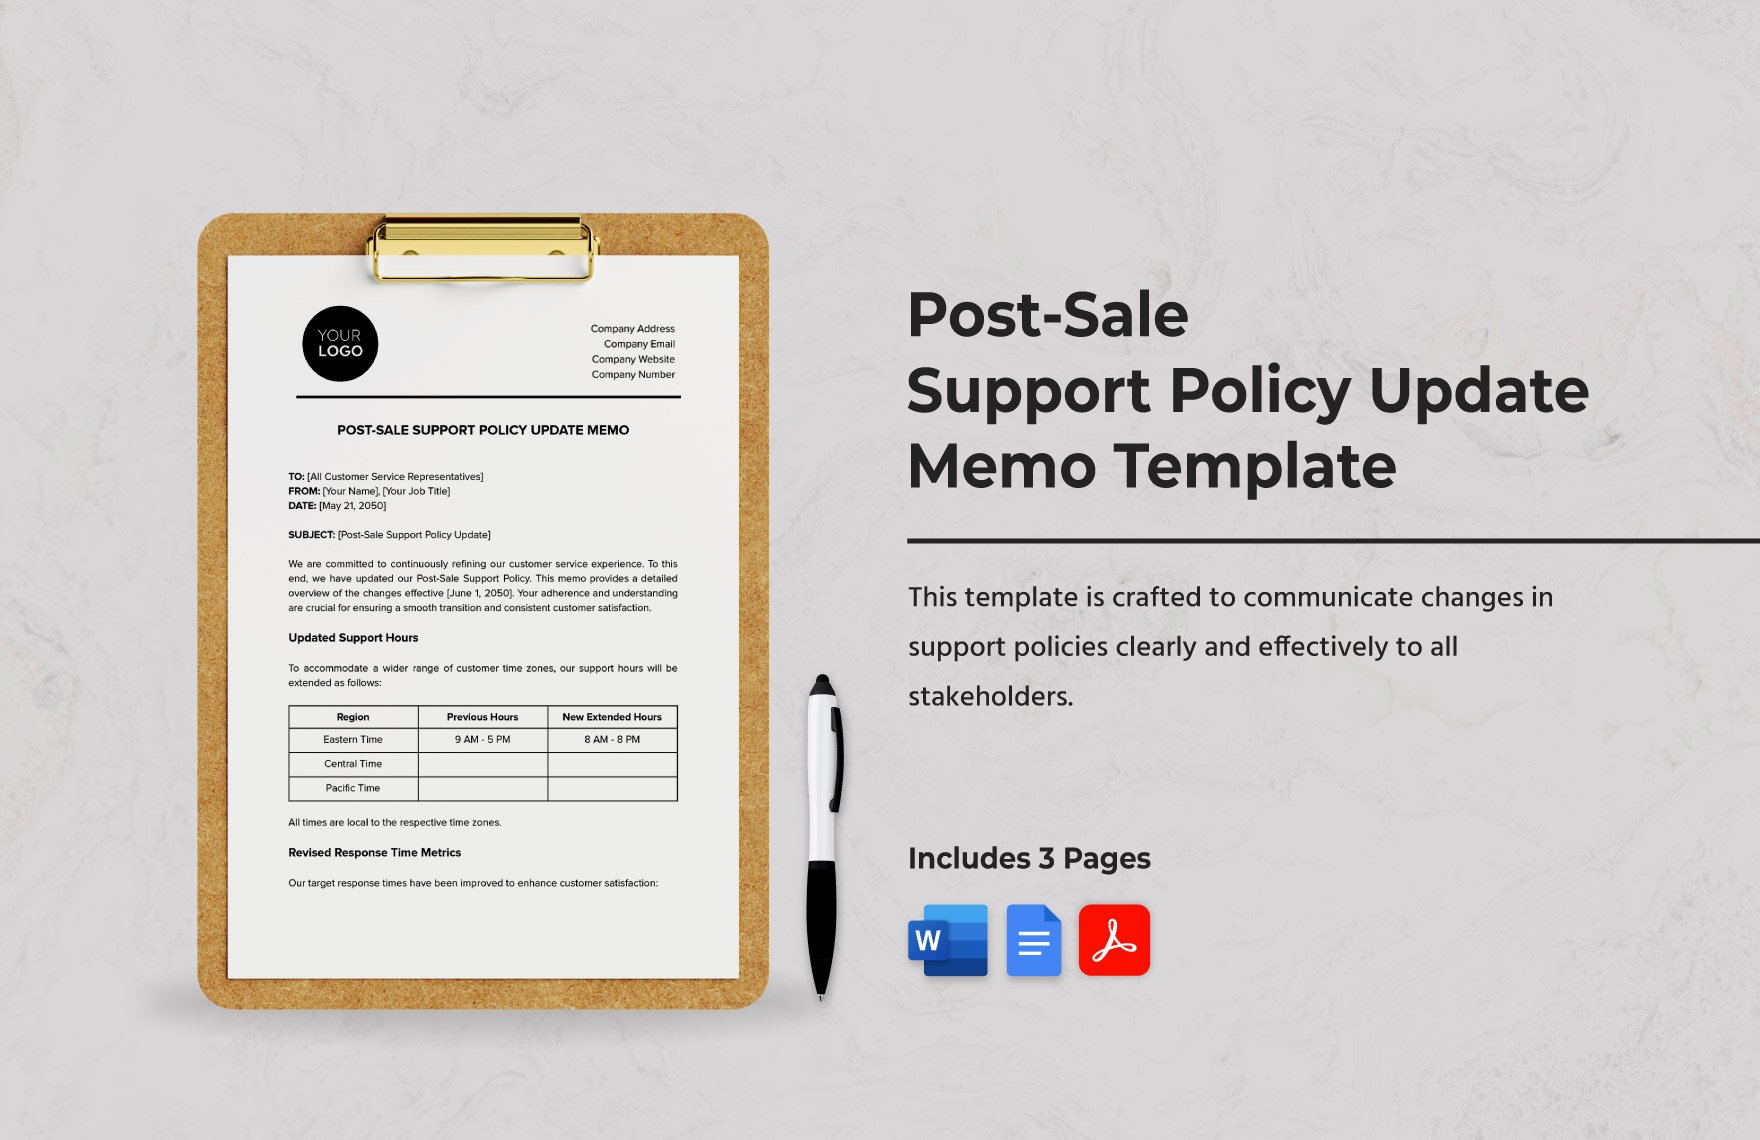 Post-Sale Support Policy Update Memo Template